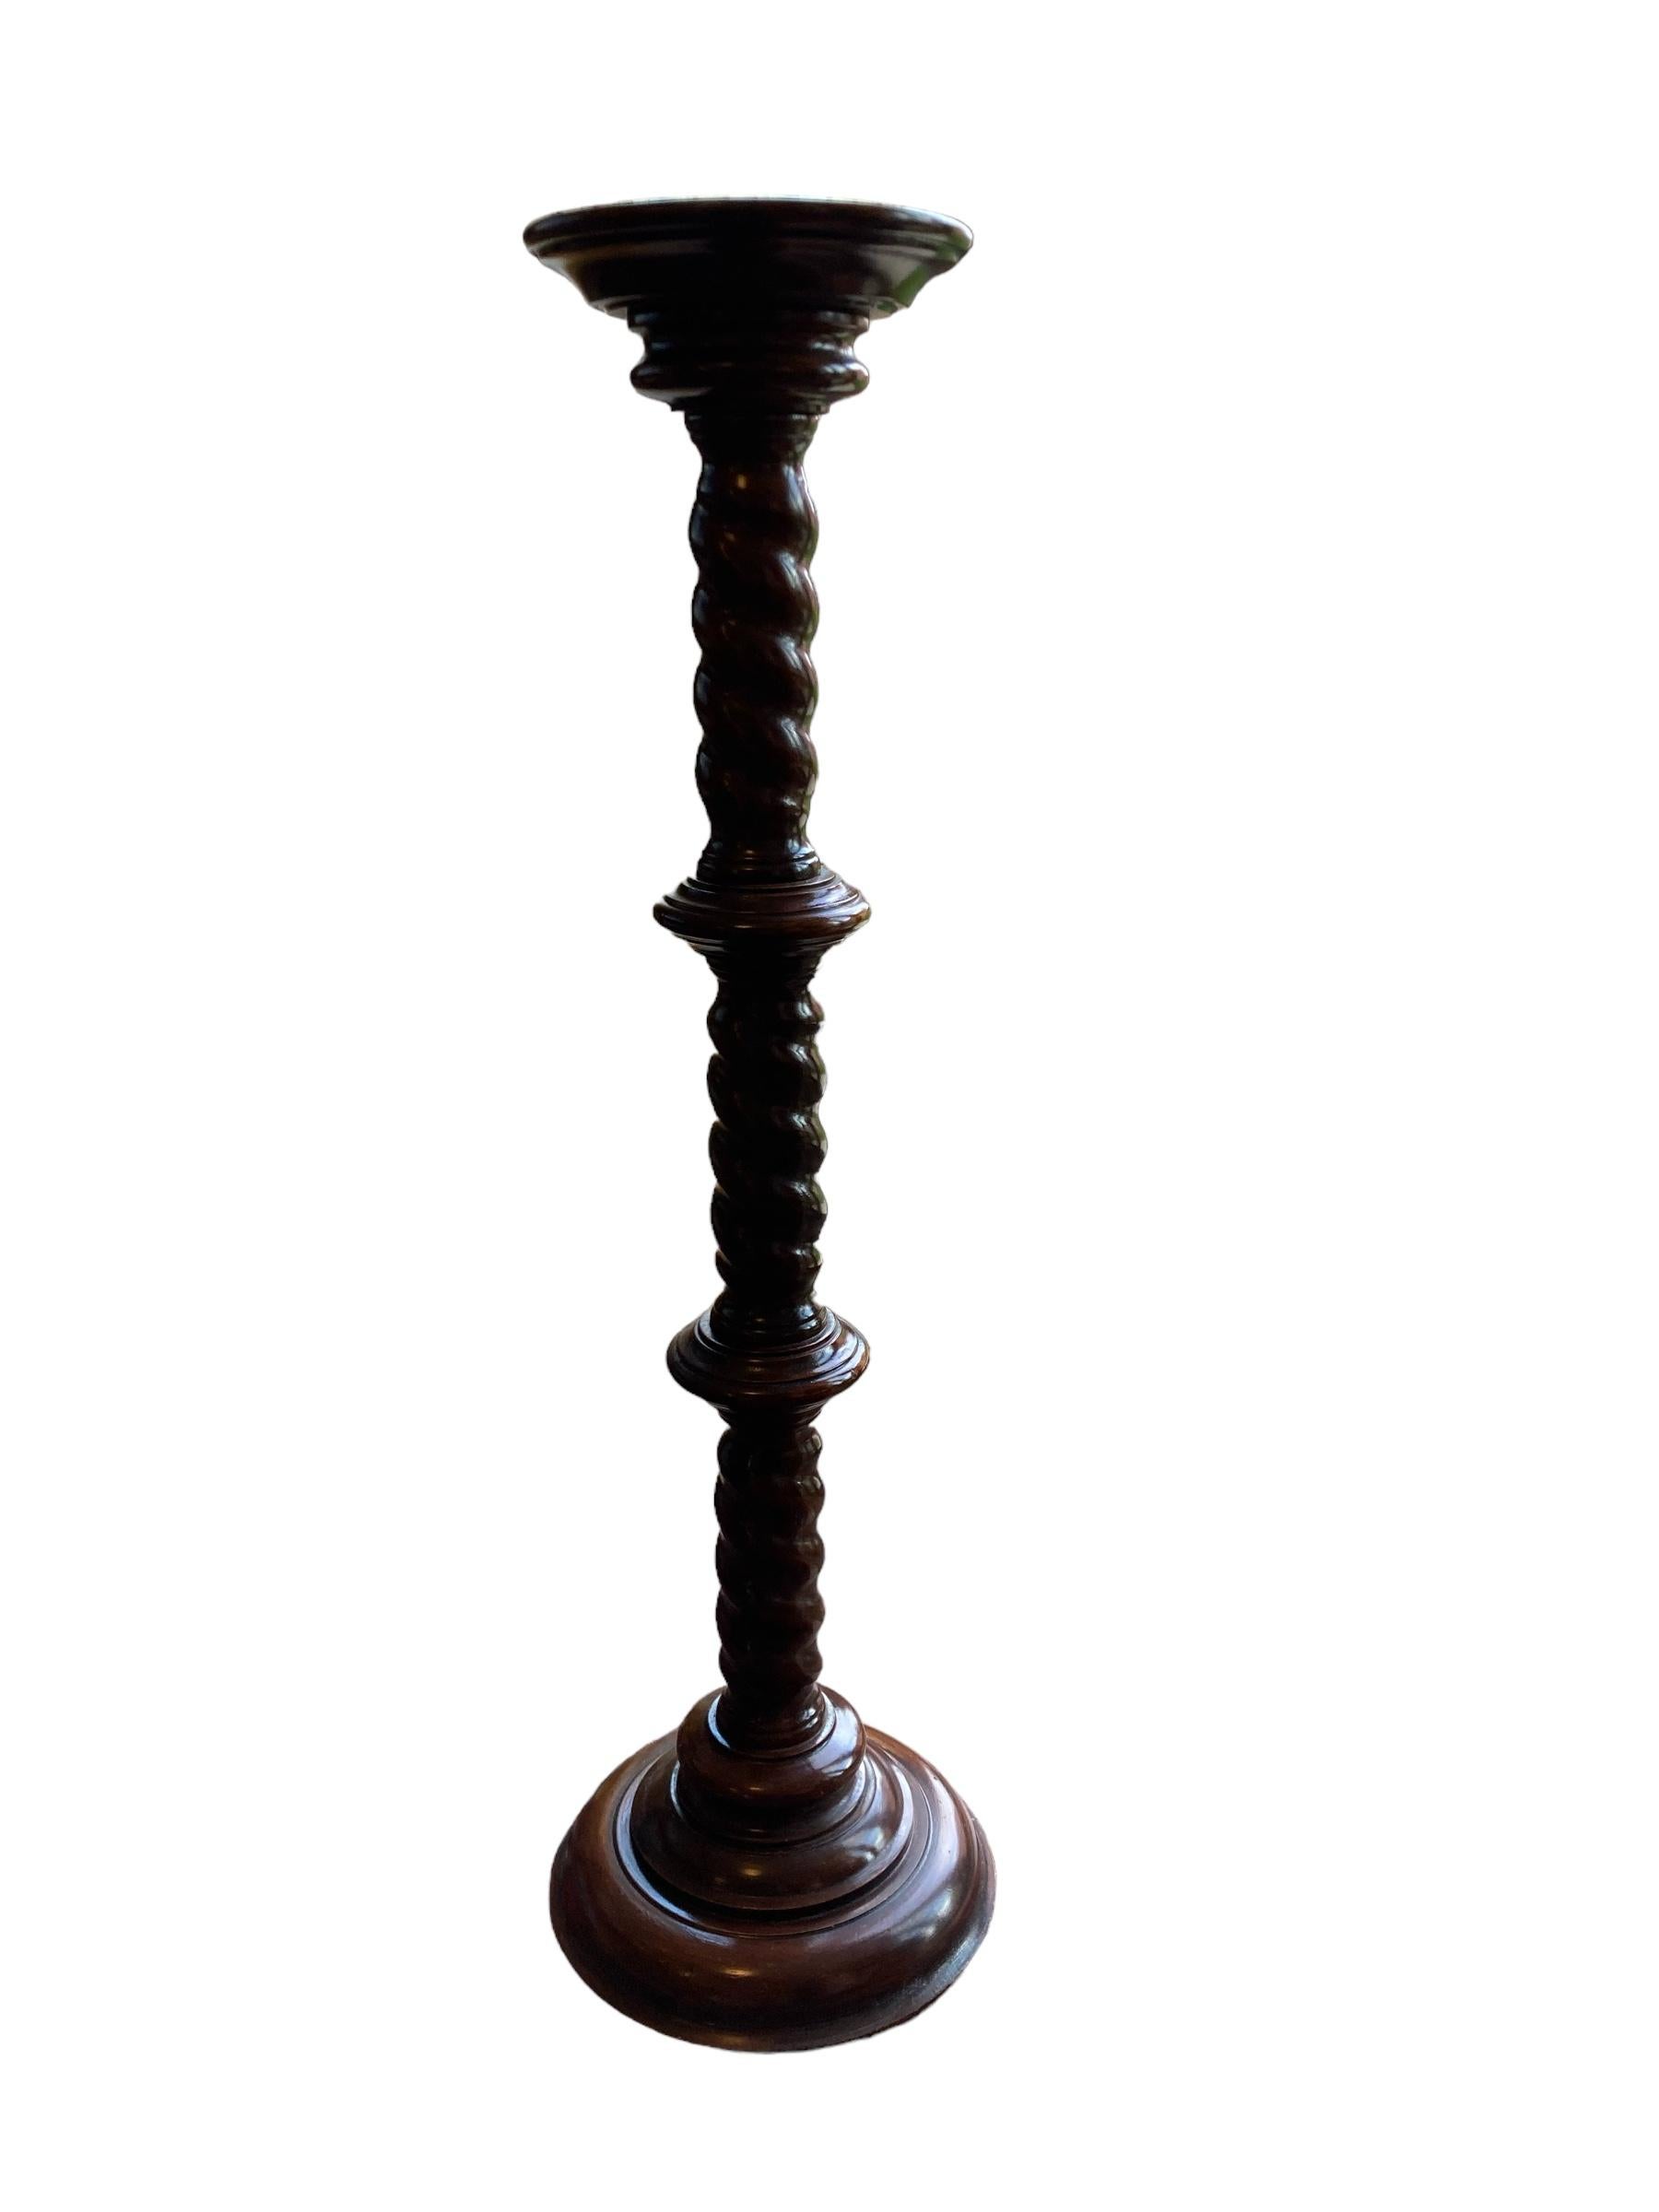 19th Century Carved Mahogany Pedestal Torchere with a captivating barley twist design. Crafted with precision and attention to detail, this exquisite piece adds a touch of sophistication to any space. Made from dark Mahogany, its sturdy construction